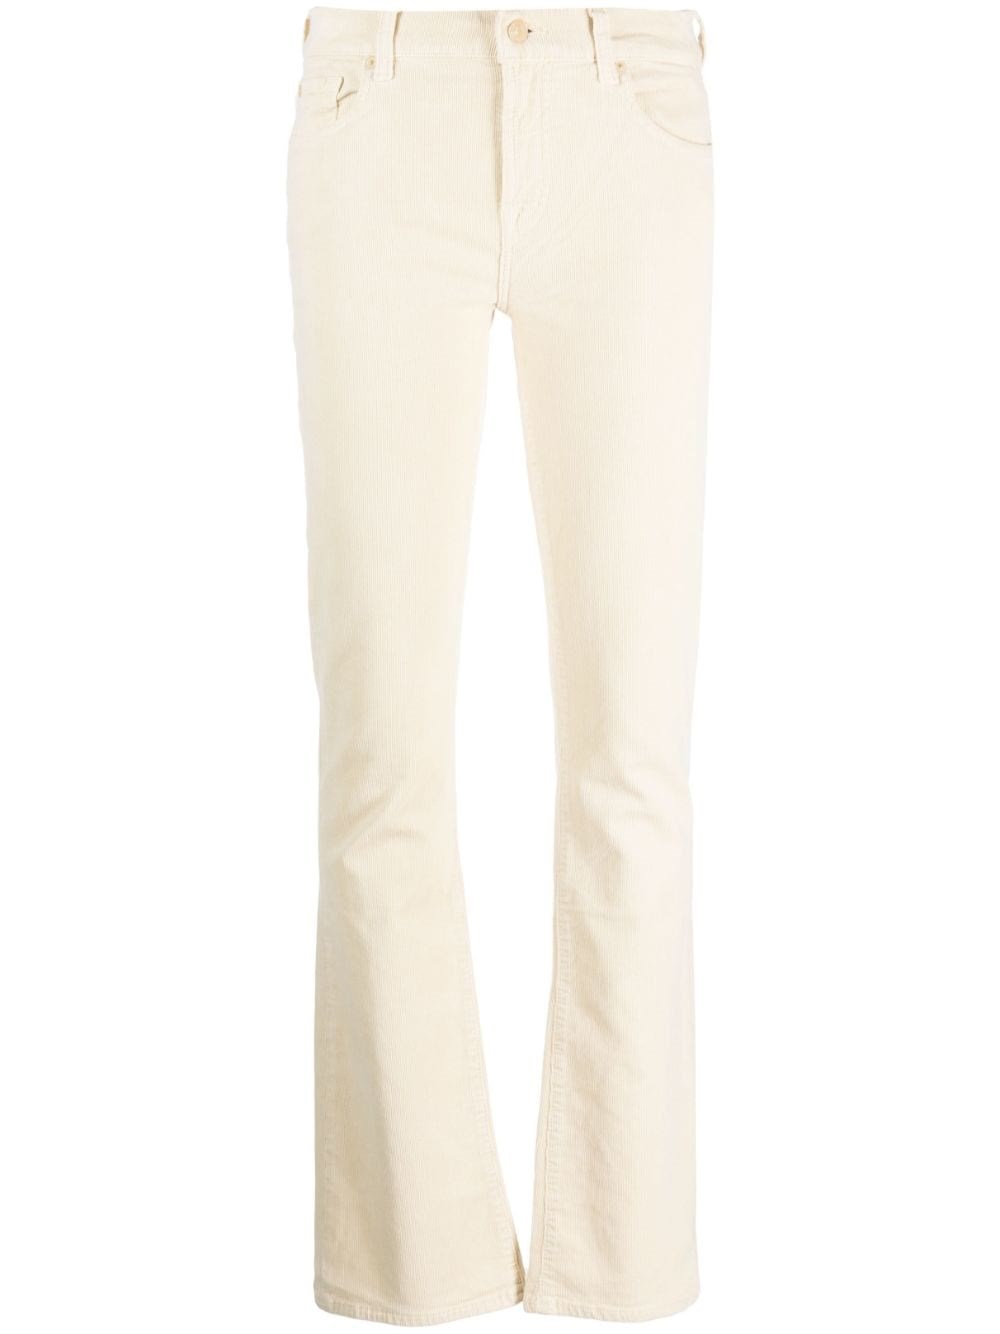 7 FOR ALL MANKIND `BOOTCUT CORDUROY TAPIOCA` JEANS